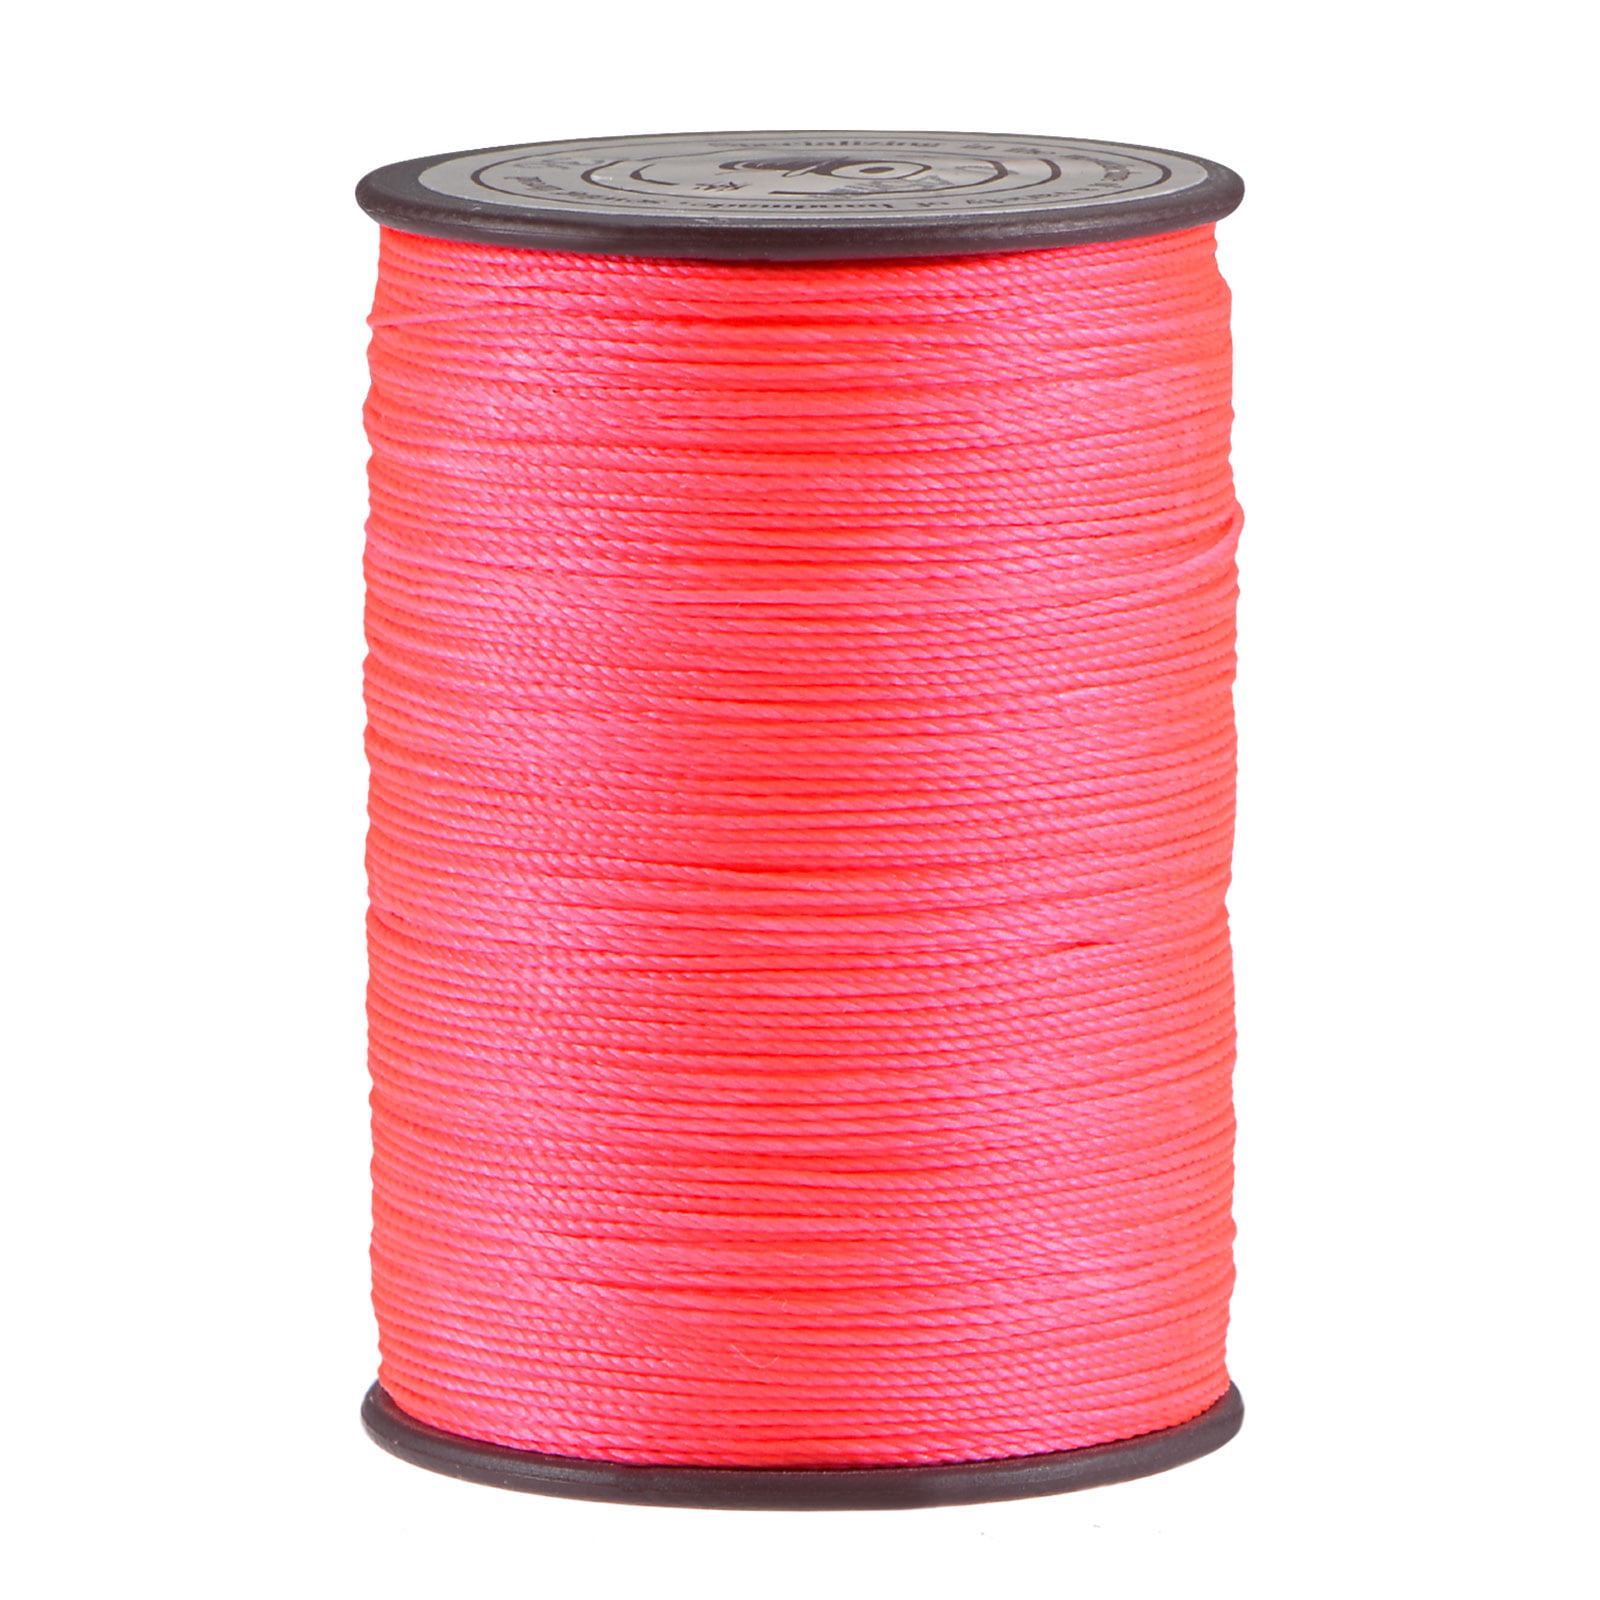 Thin Waxed Thread 175 Yards 0.45mm Polyester String Cord for Machine Sewing Hand Quilting Weaving, Red